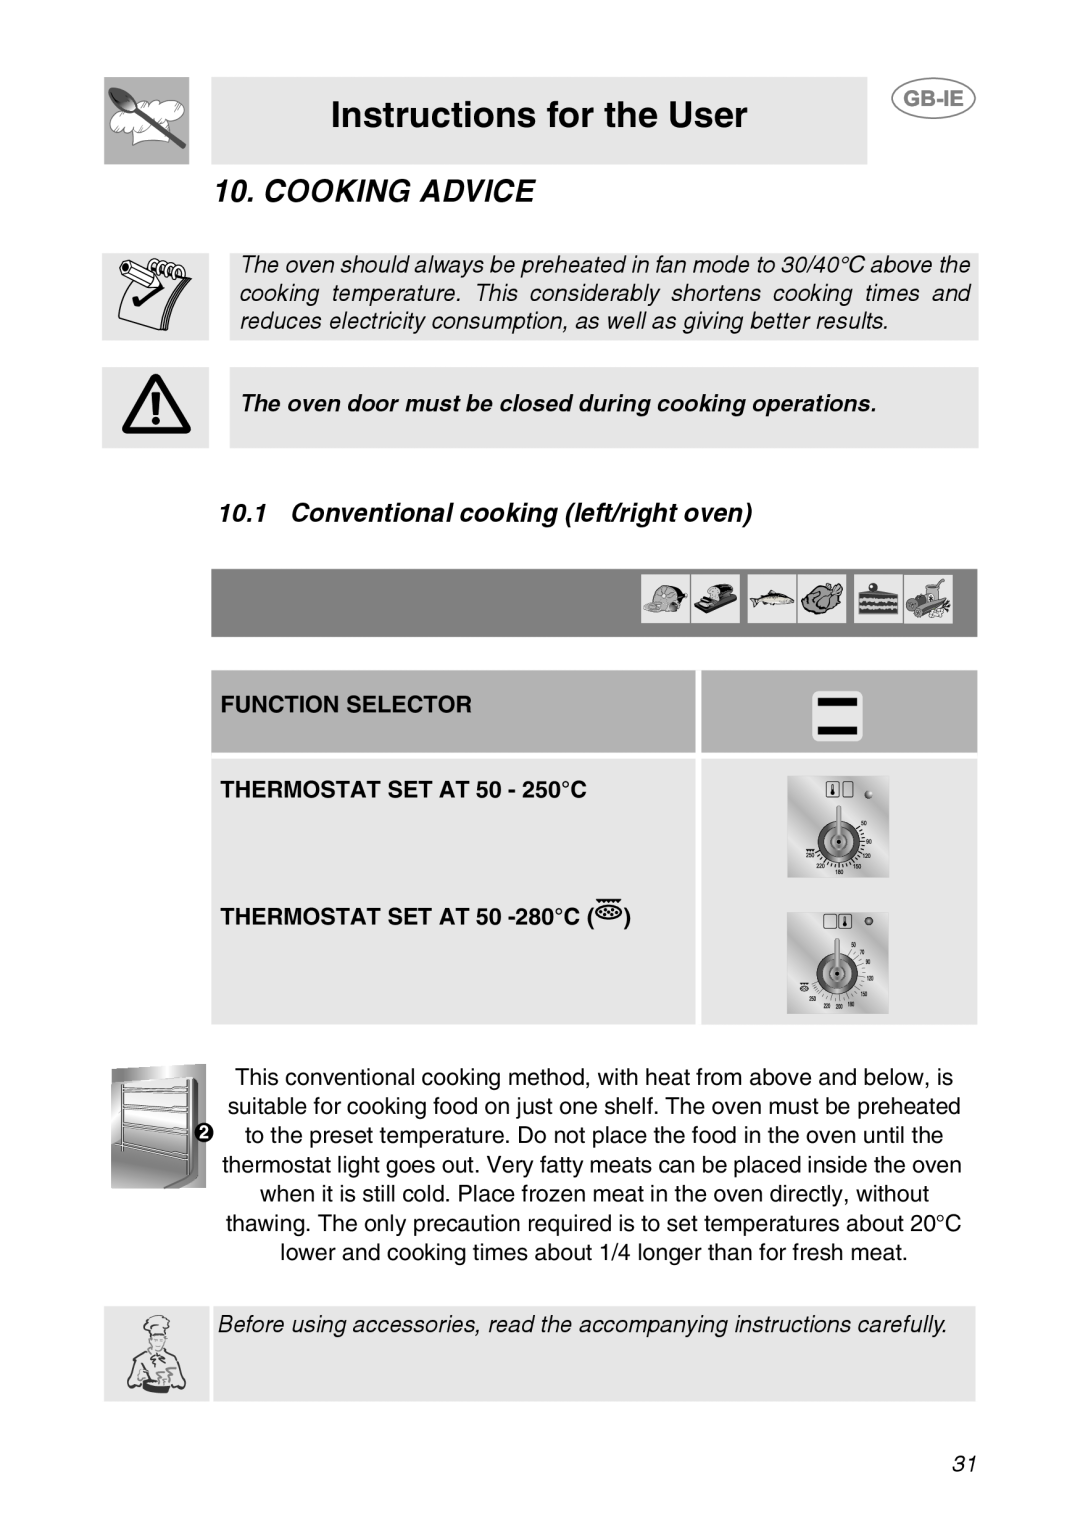 Smeg CS150SA Cooking Advice, Instructions for the User, Conventional cooking left/right oven, THERMOSTAT SET AT 50 -280C 